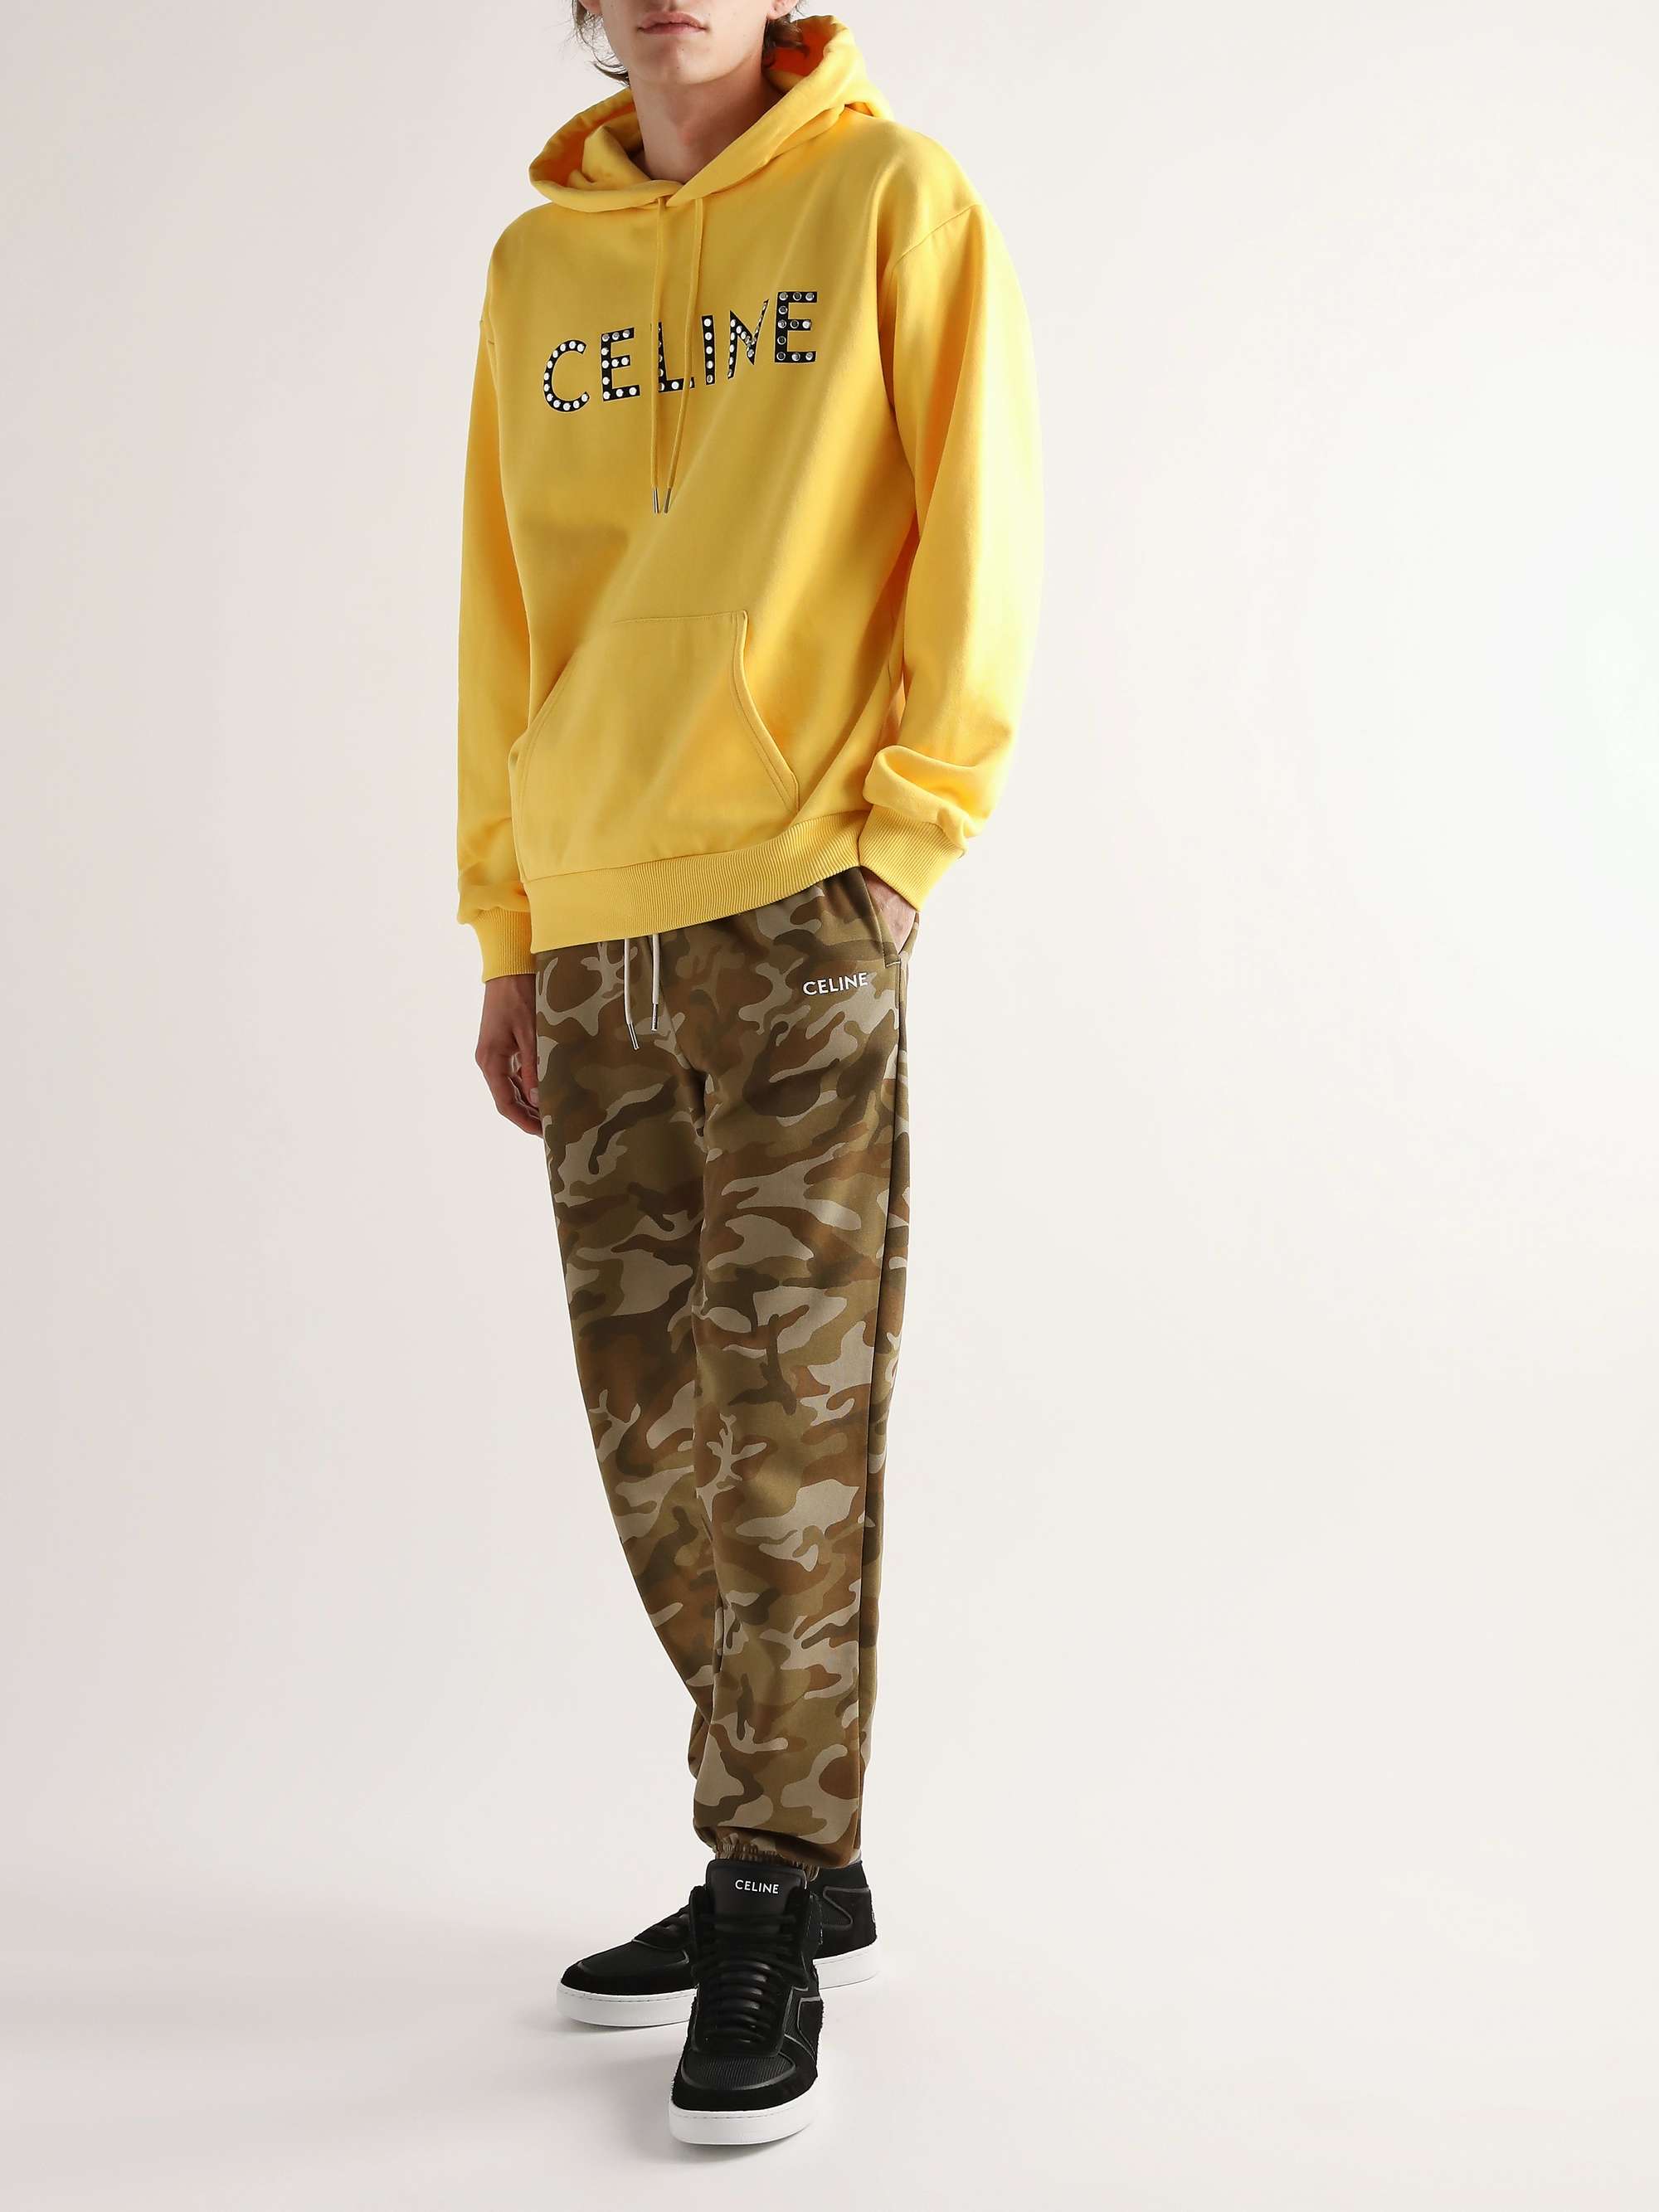 CELINE HOMME Slim-Fit Tapered Camouflage-Print Cotton-Jersey Sweatpants